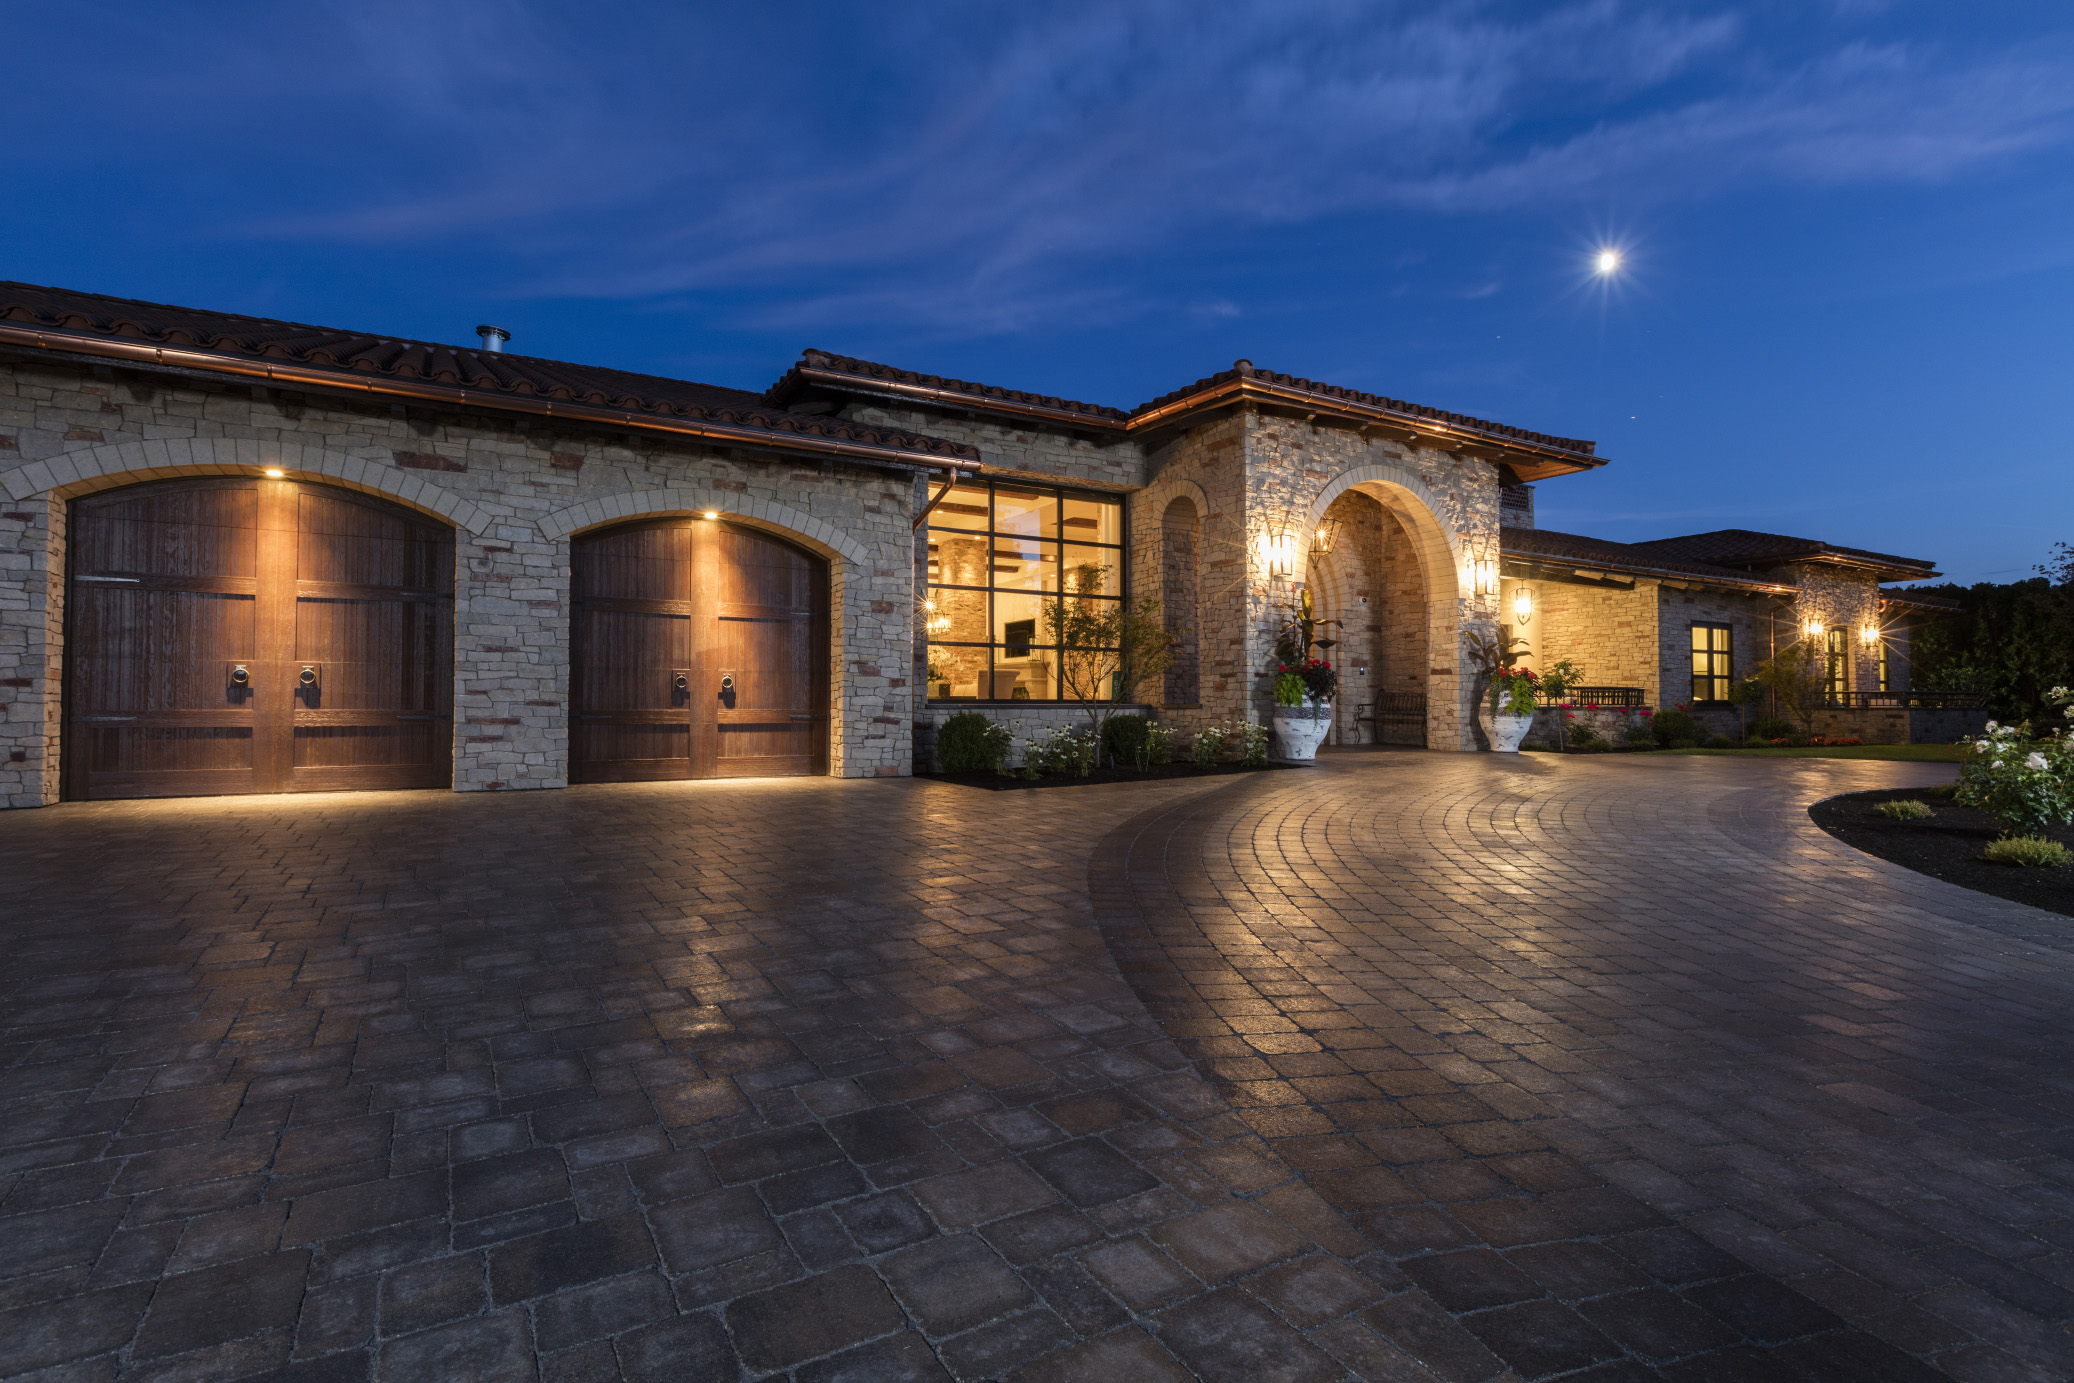 An Italian-inspired villa in West Kelowna, designed and build by luxury home builder Apchin Design + Build.